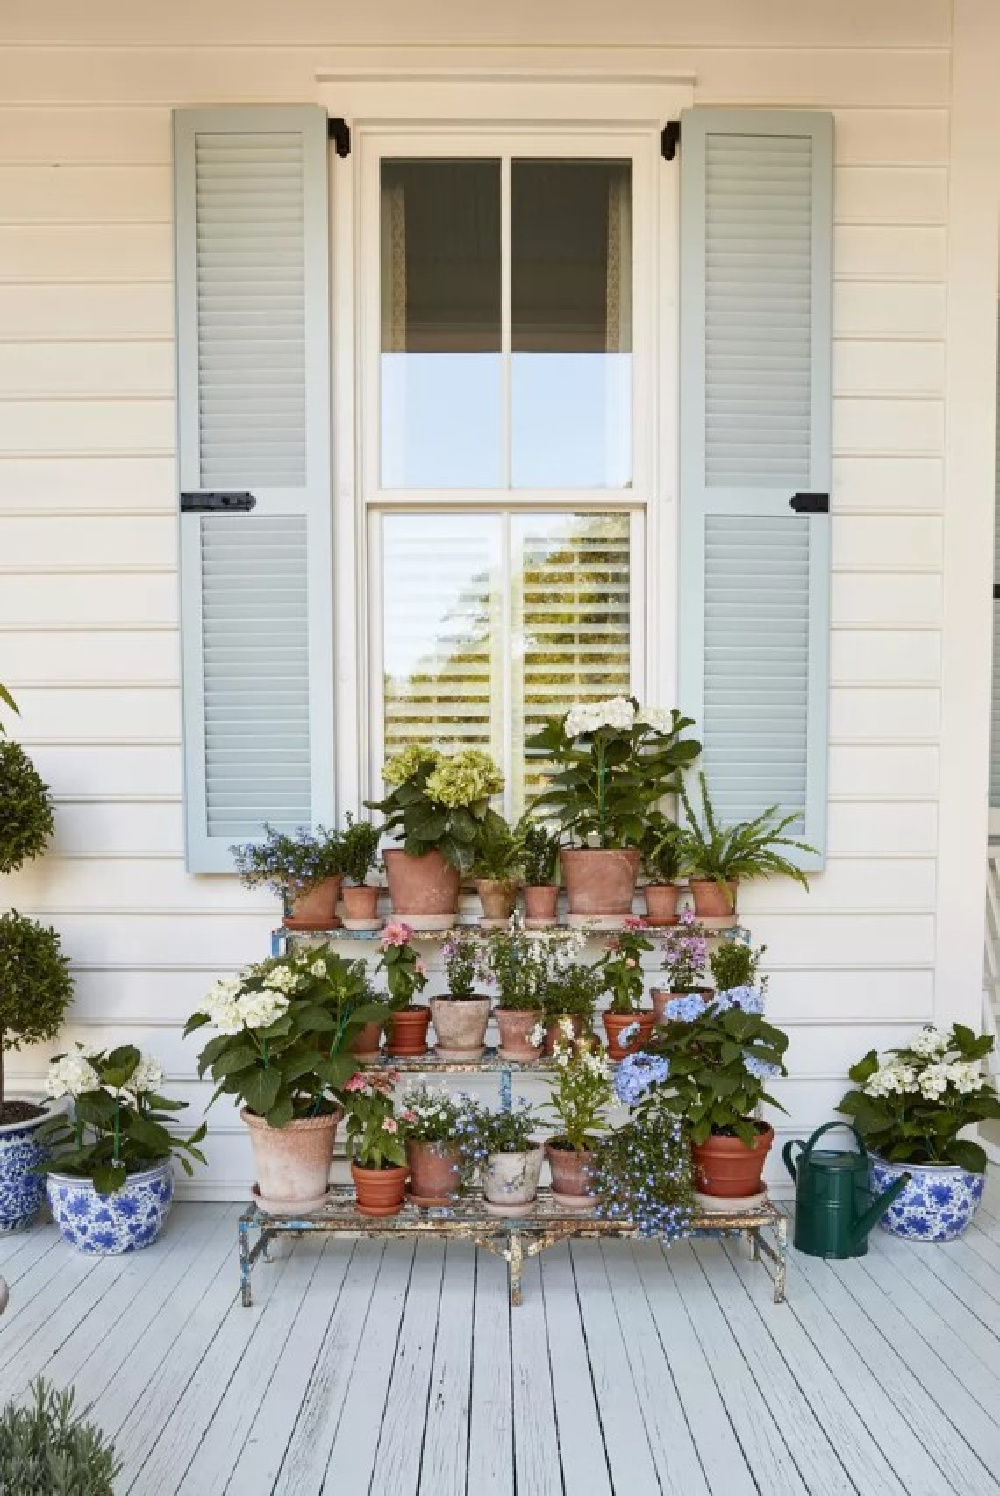 BM Blue Porcelain shutters and Simply White siding on a charming Charleston exterior - Julia Berolzheimer's home in Southern Living (photo: Hector Manuel Sanchez). #bmsimplywhite #bmblueporcelain